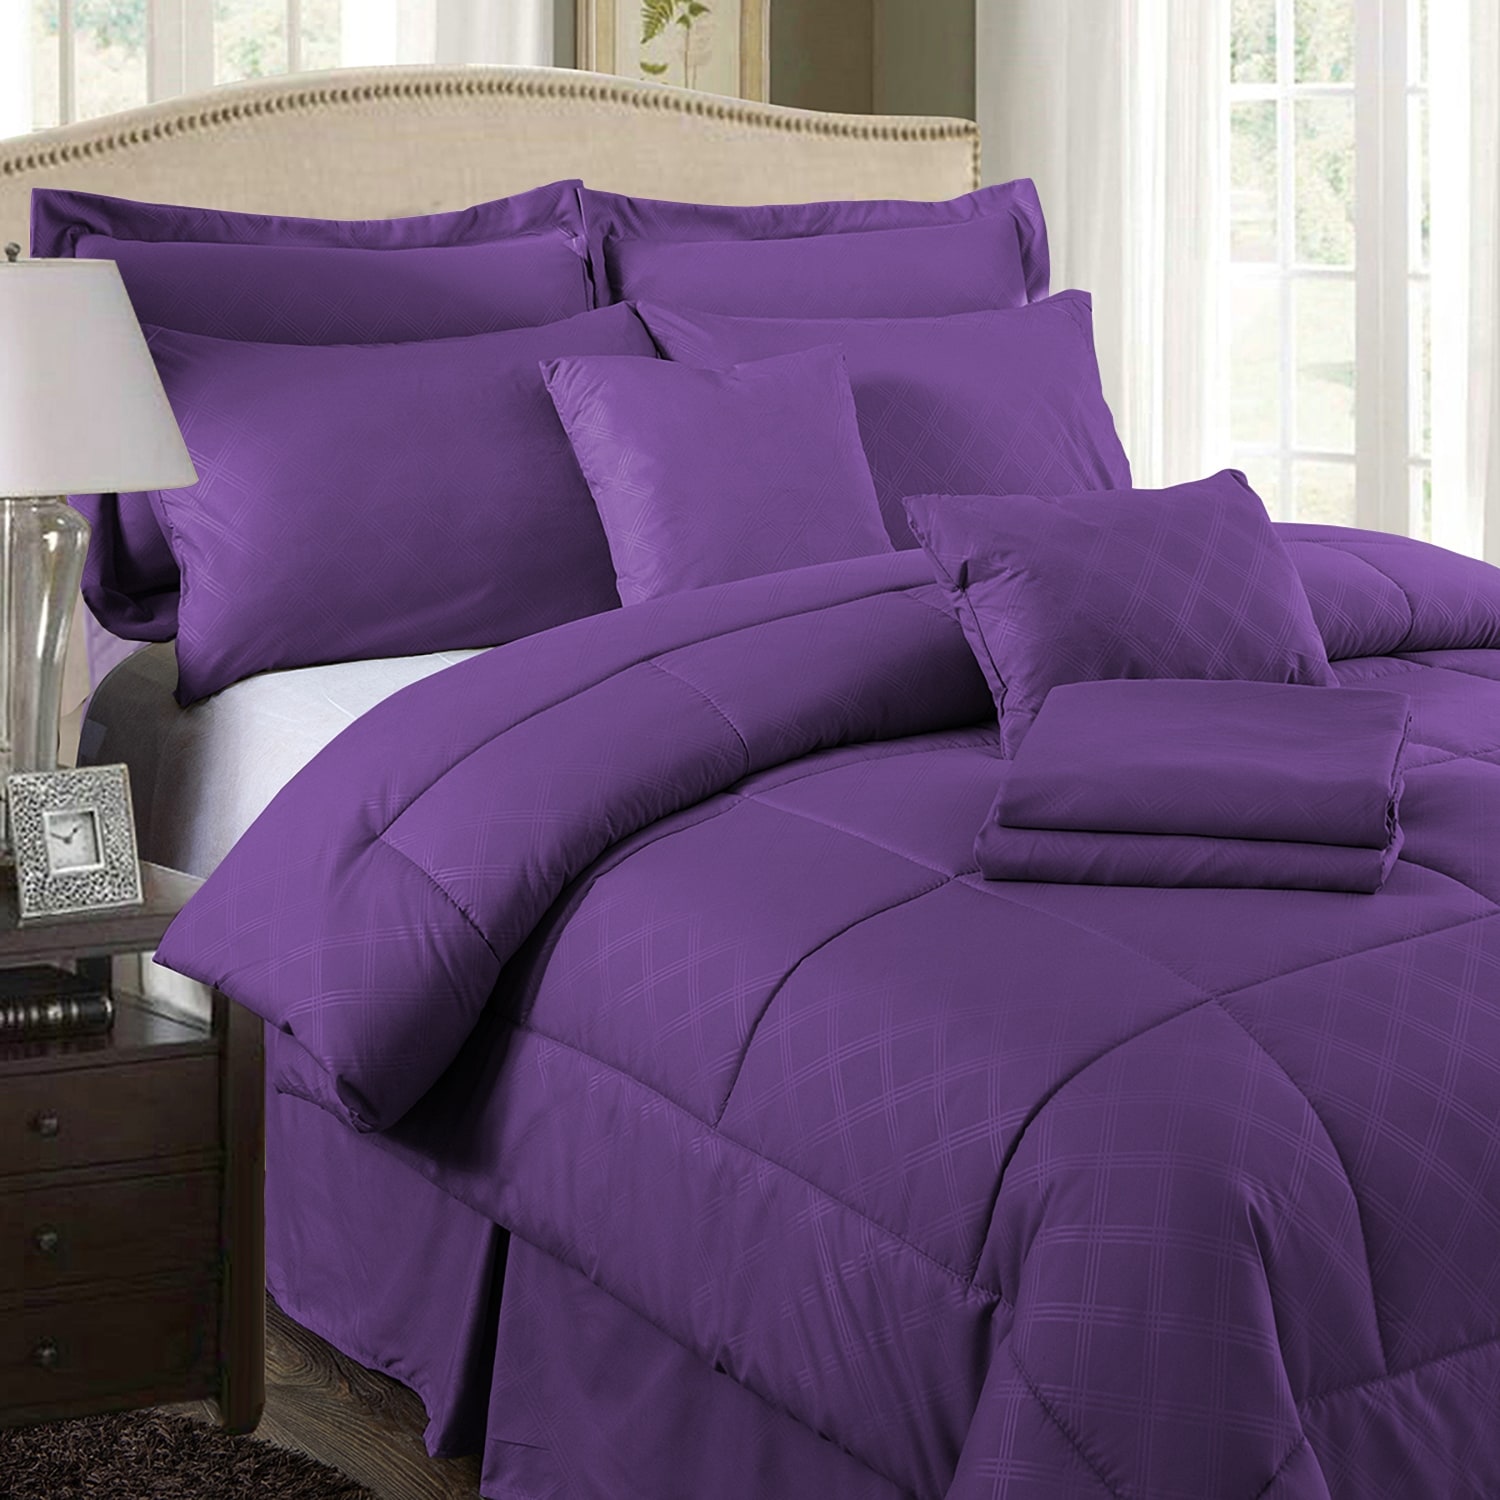 Purple Comforters and Sets - Bed Bath & Beyond